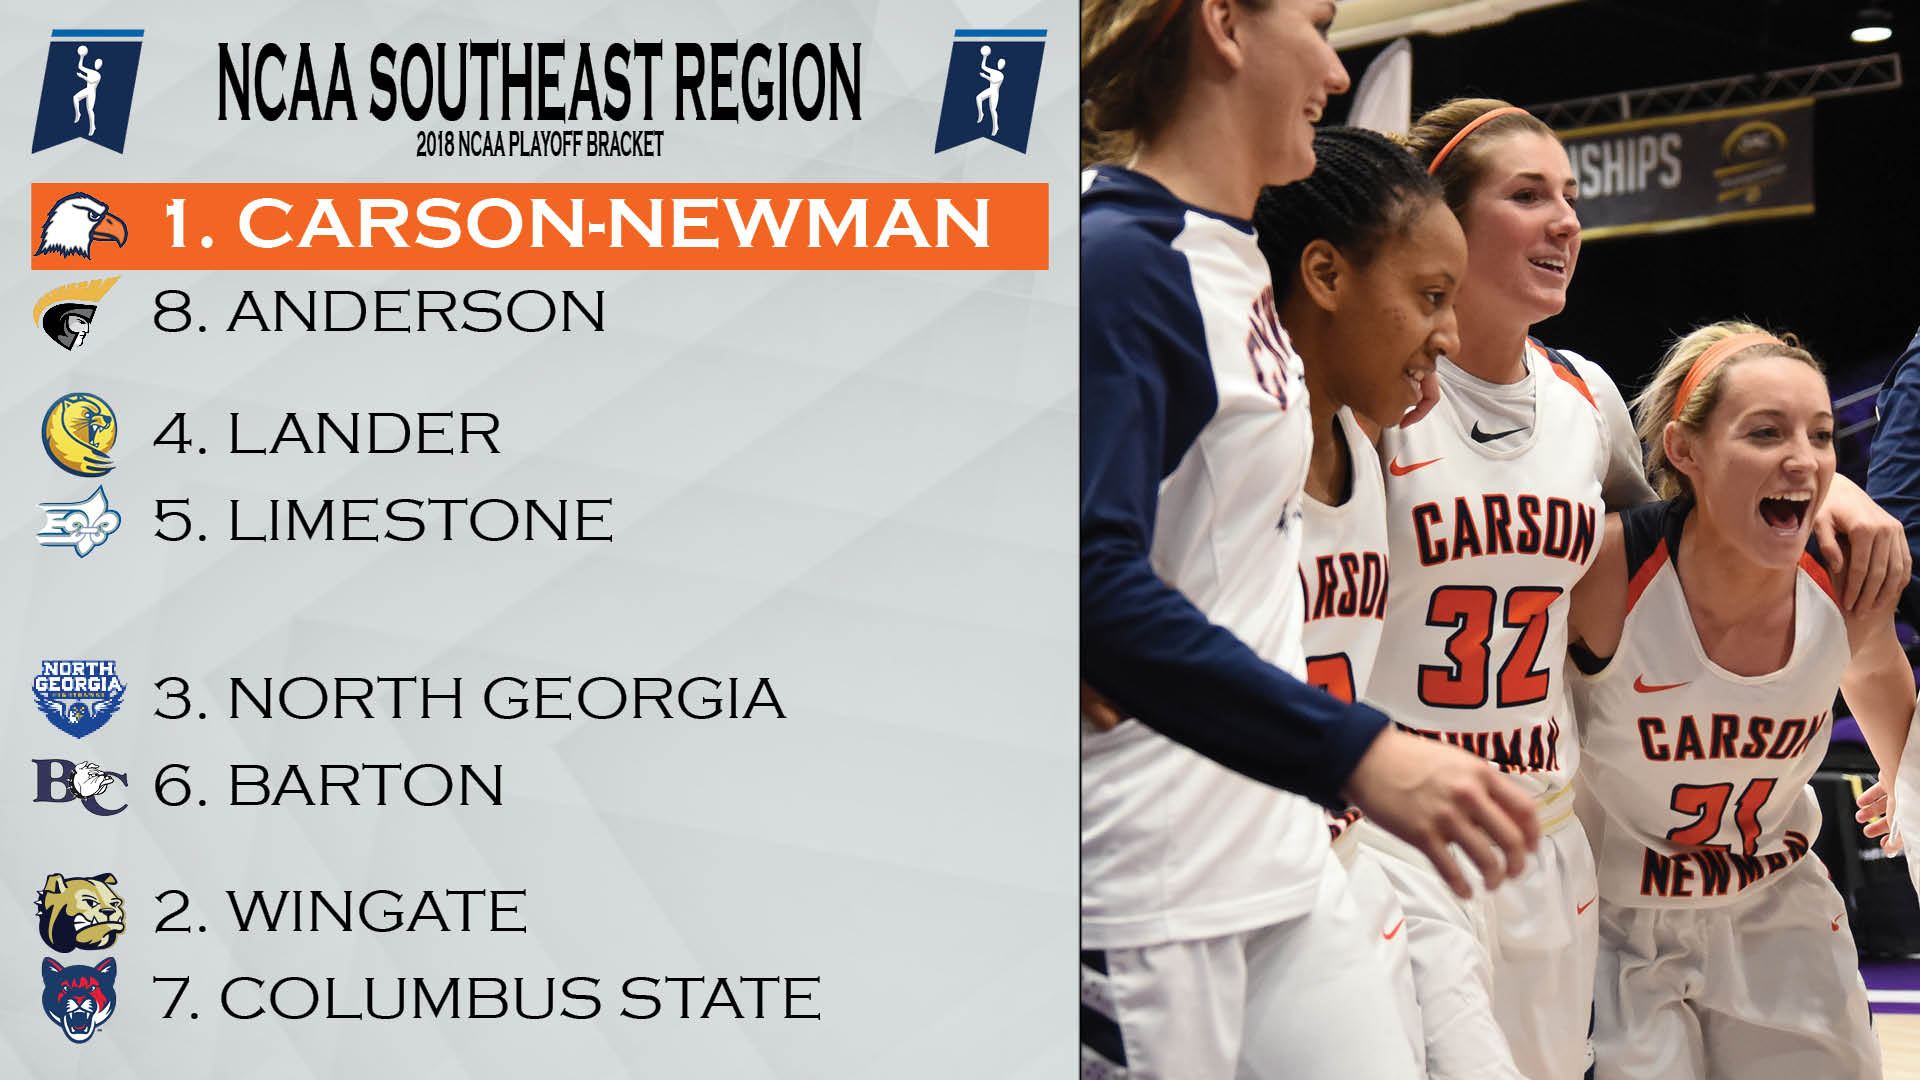 #7 C-N reigns supreme in Southeast Region, will host NCAA Tournament